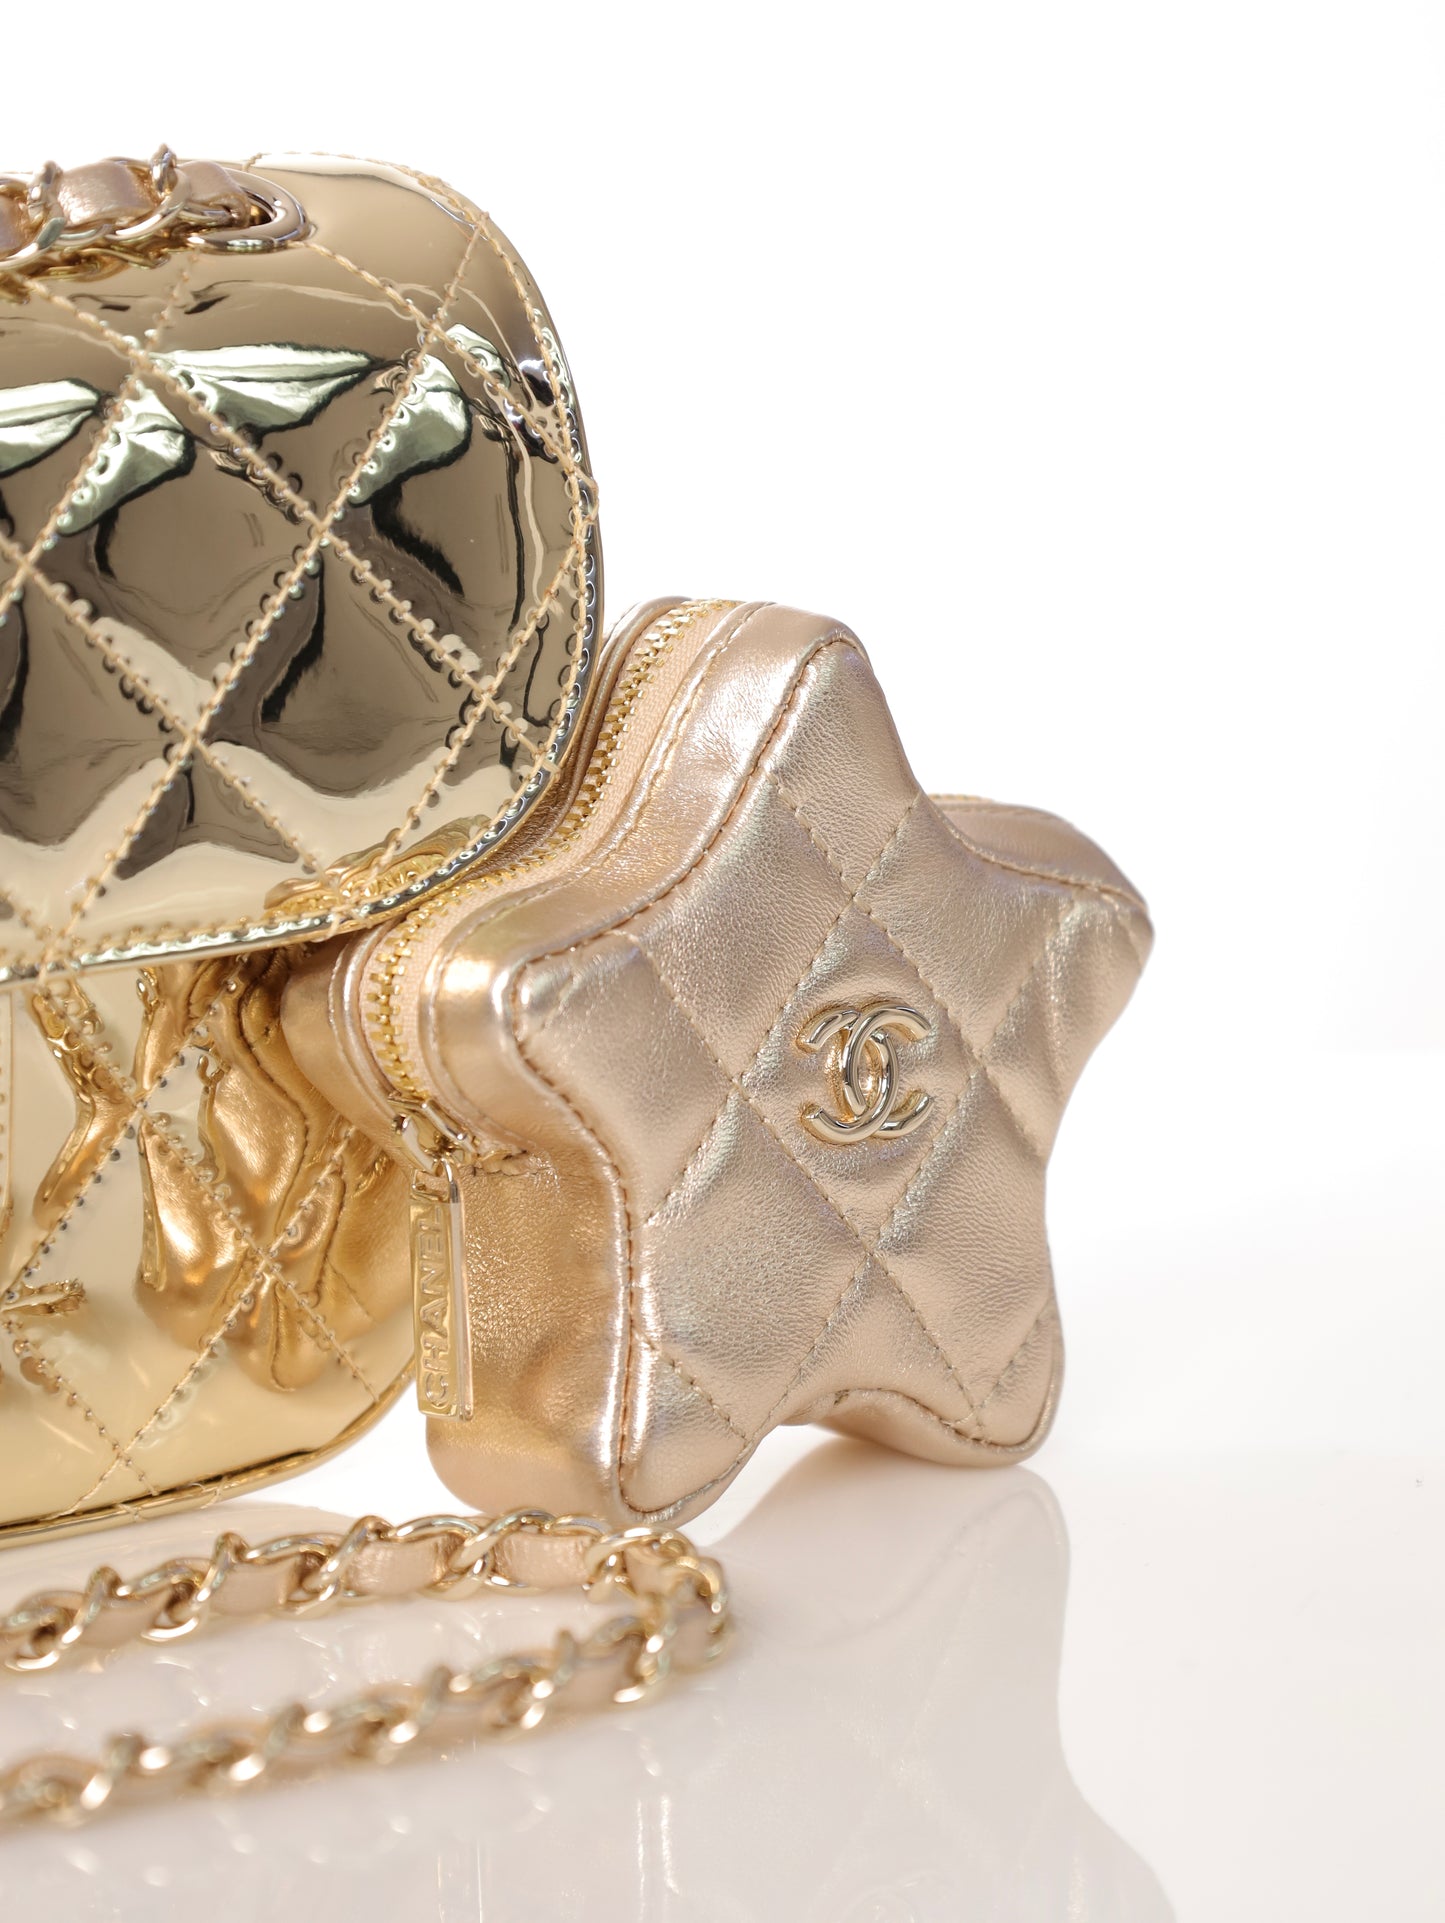 CHANEL Timeless Mini Gold with Star Pendant Classic Bag